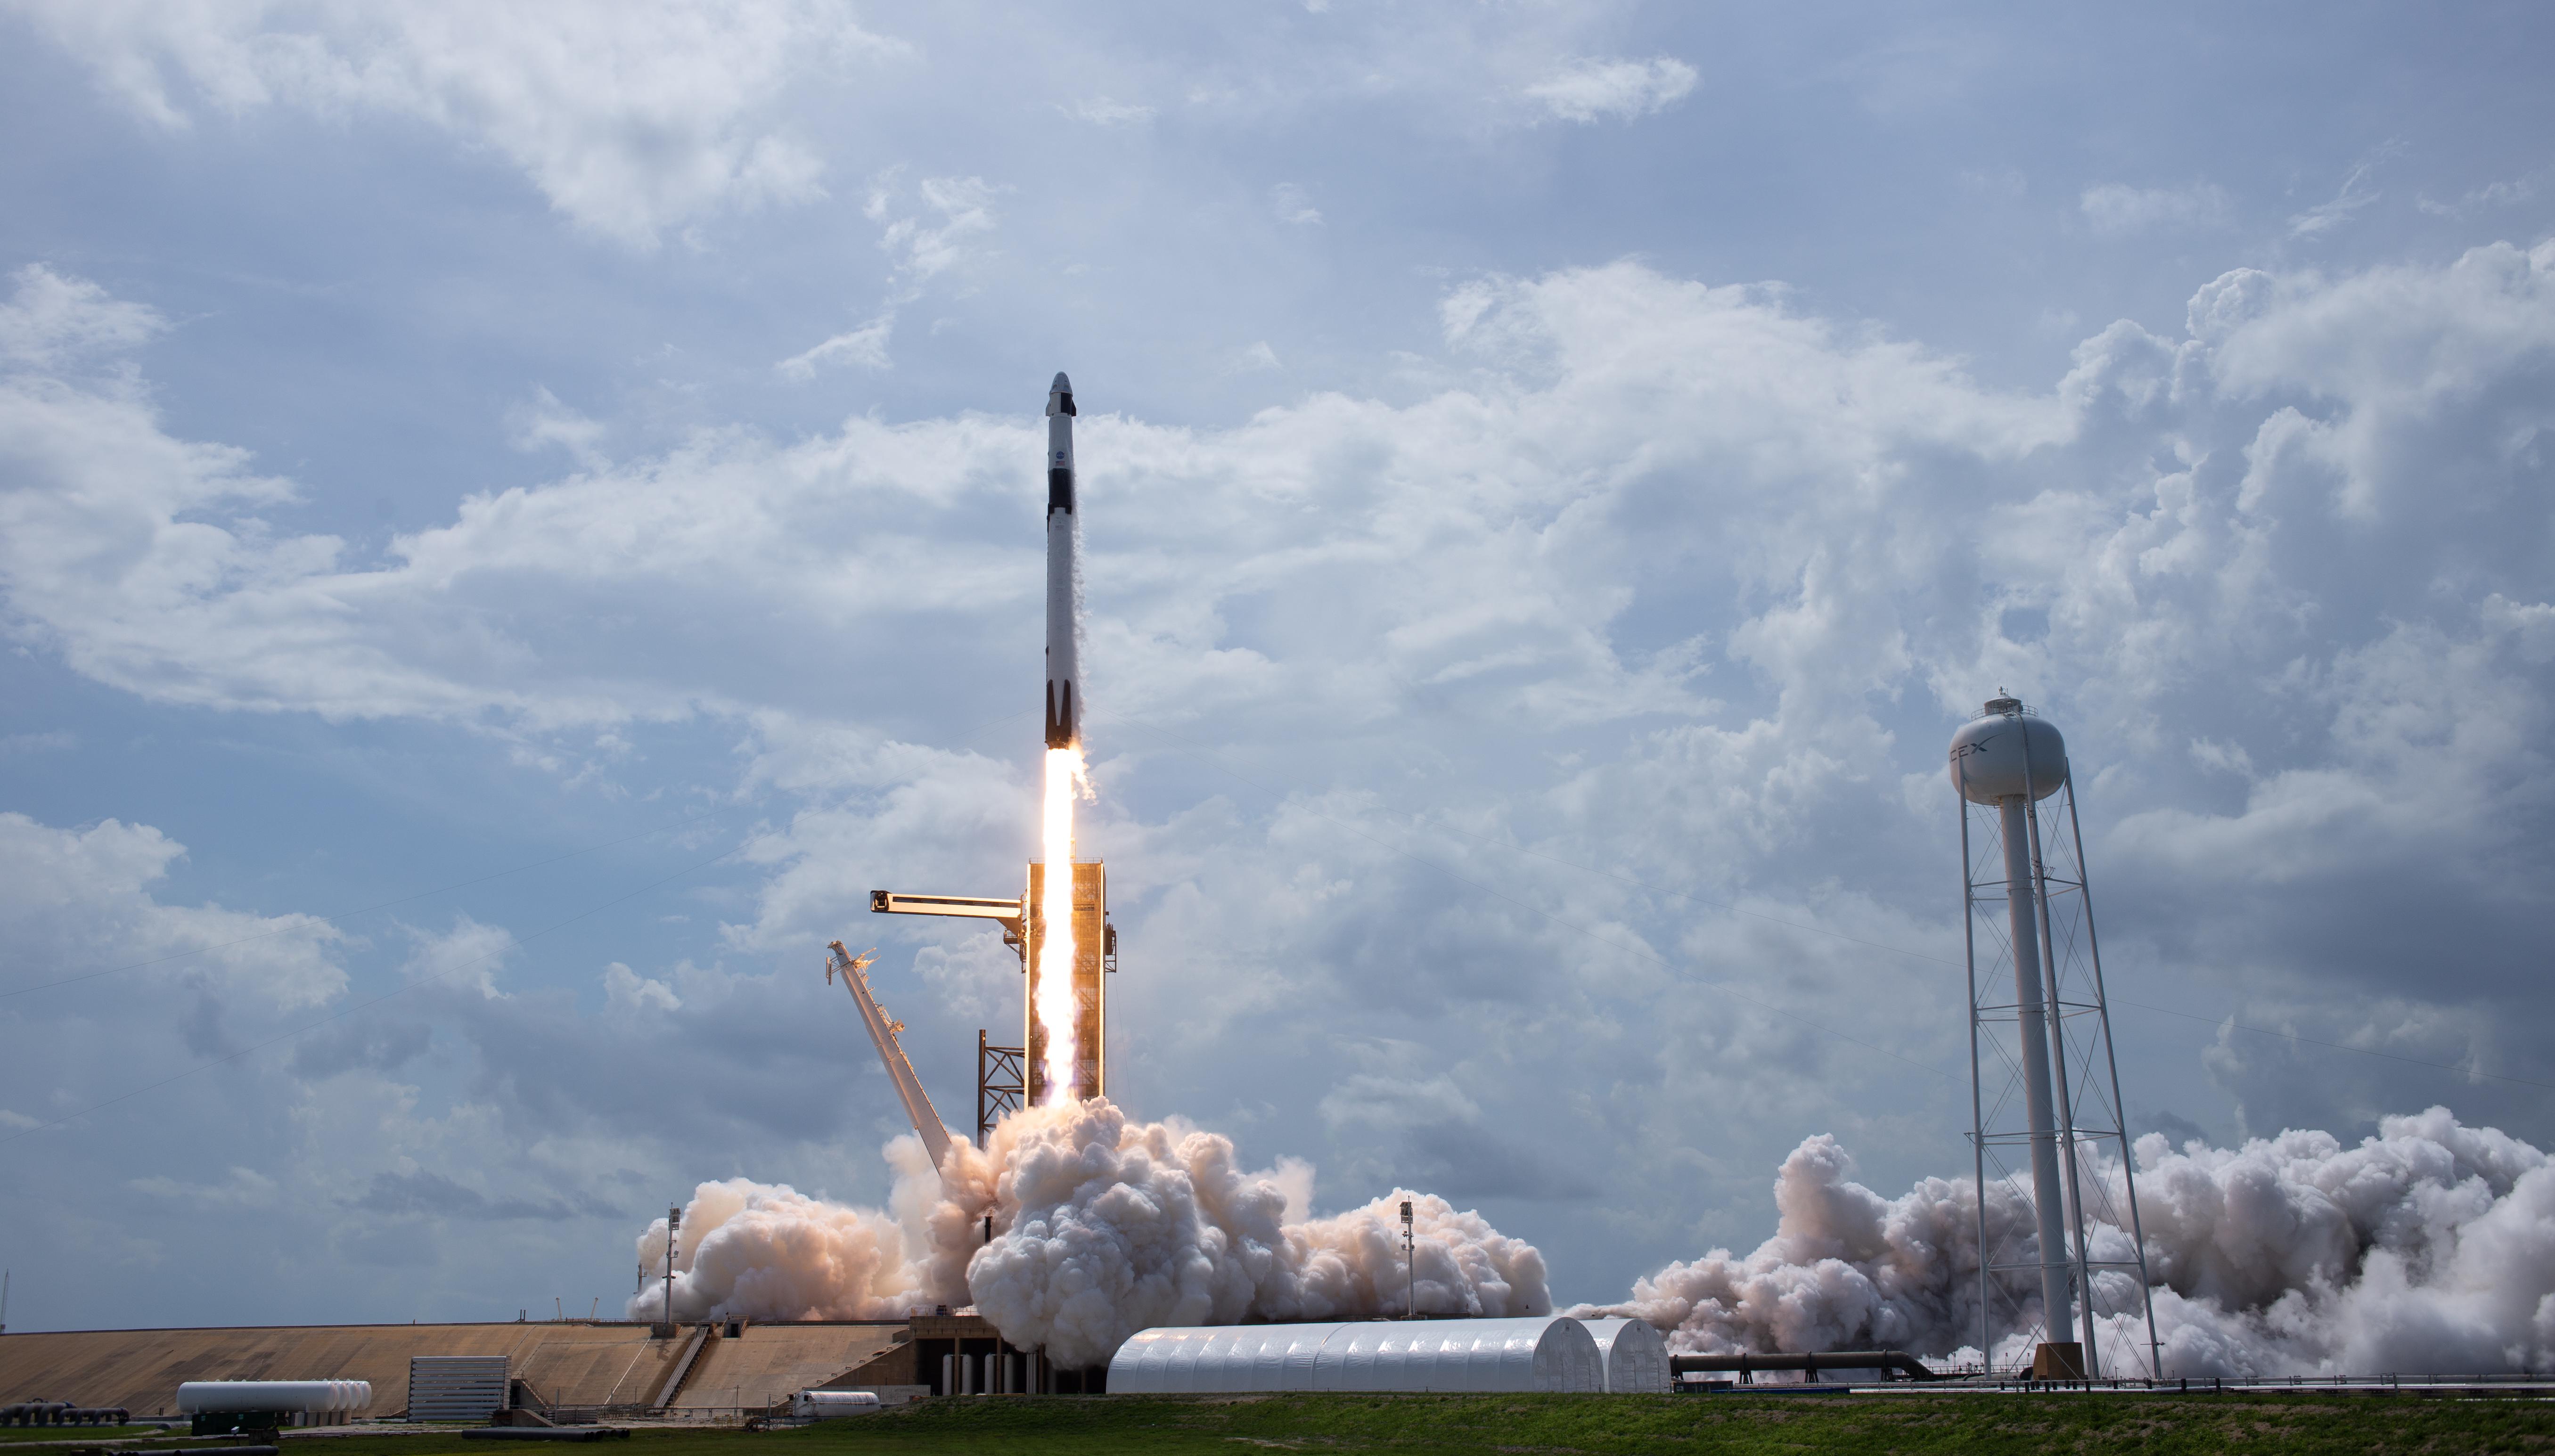 Spacex 4K wallpaper for your desktop or mobile screen free and easy to download